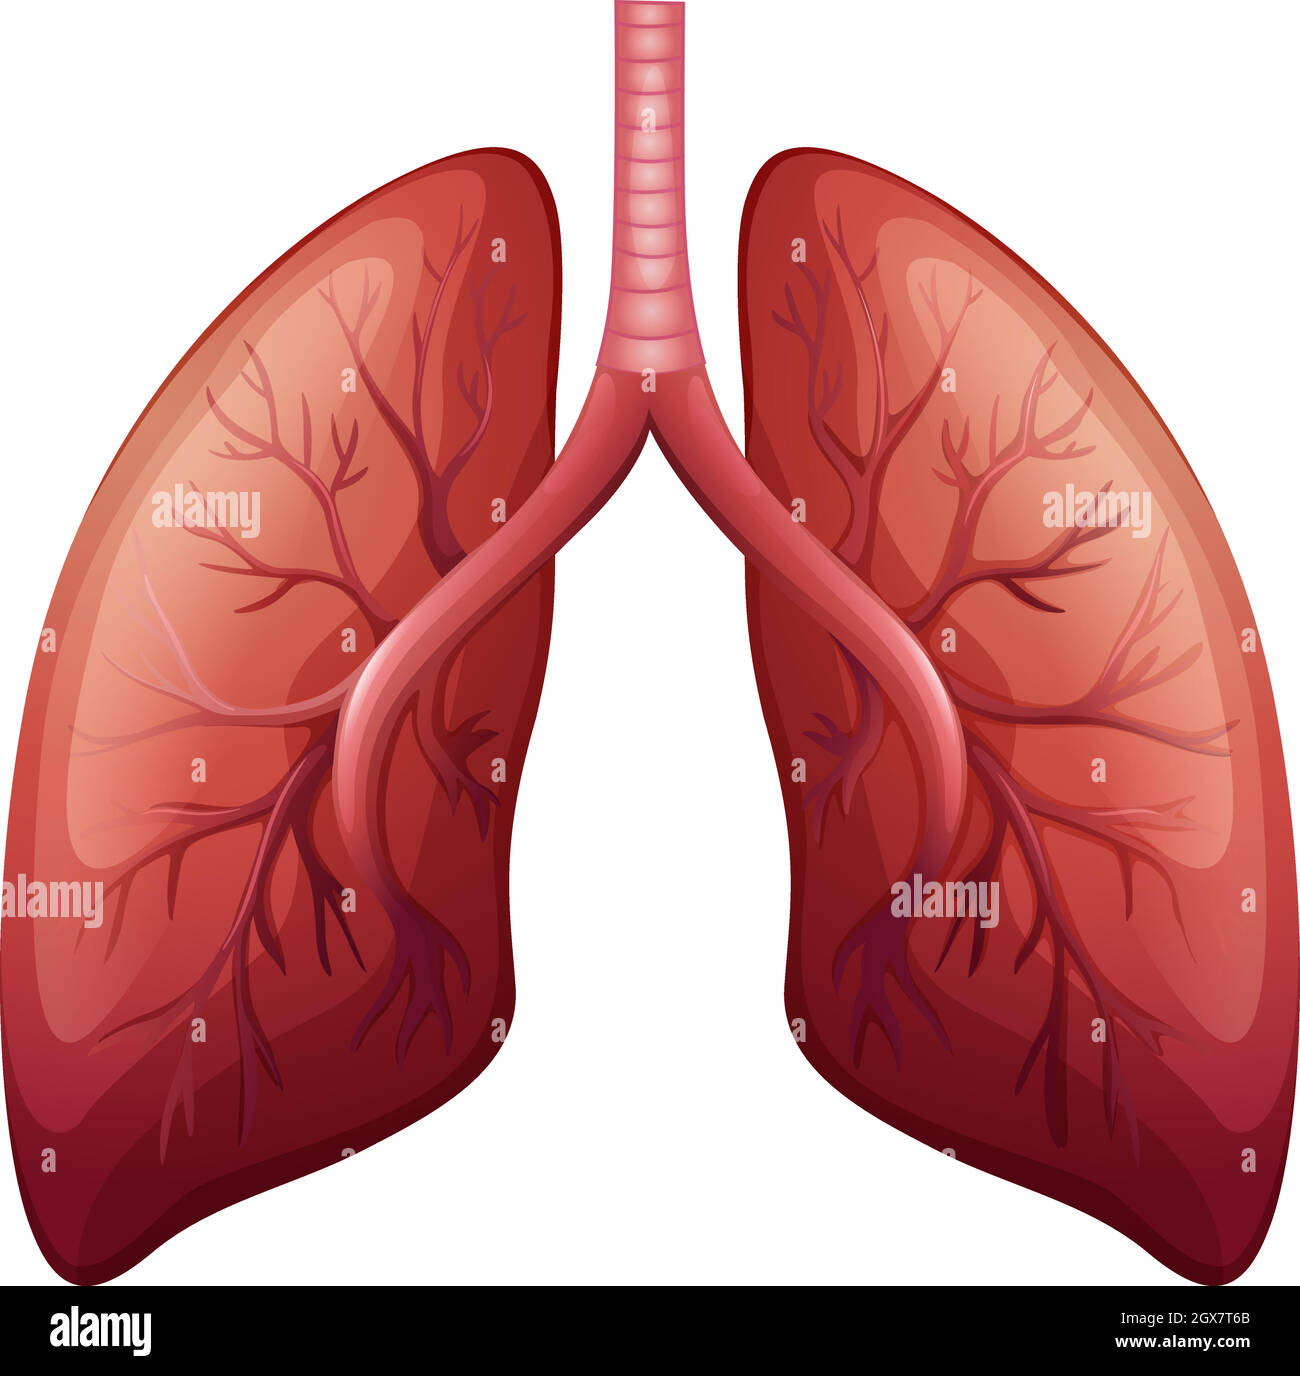 Lung cancer diagram in detail Stock Vector